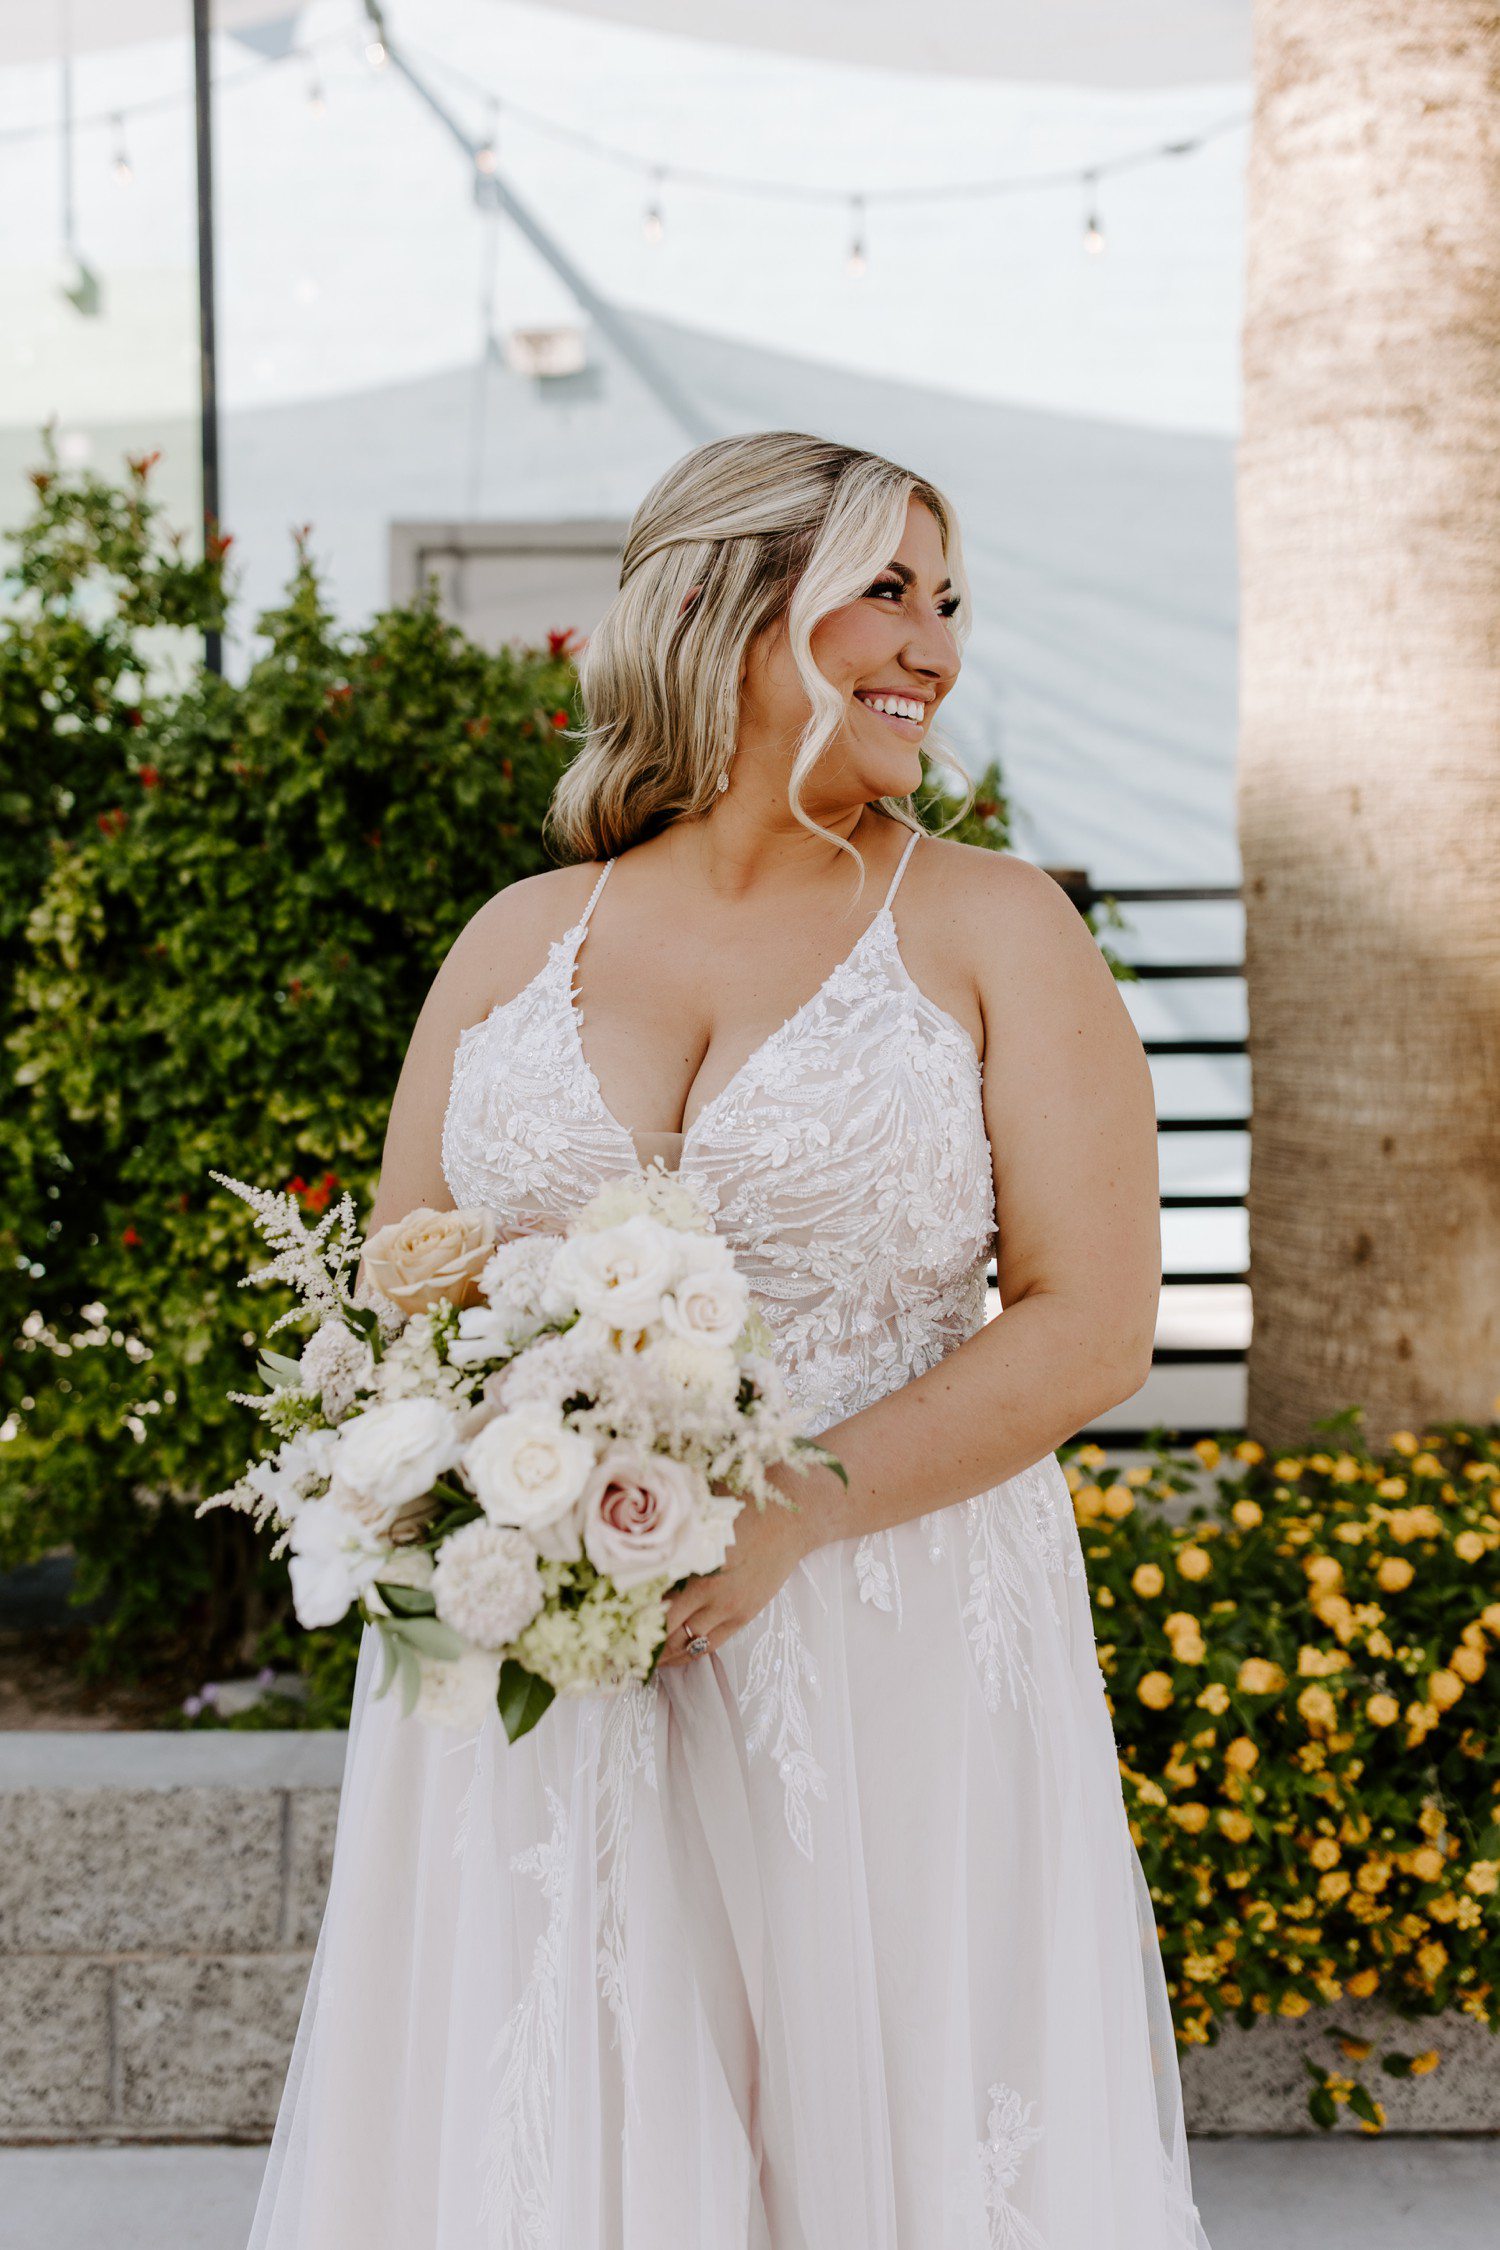 Bridal portraits at The Doyle in Las Vegas.